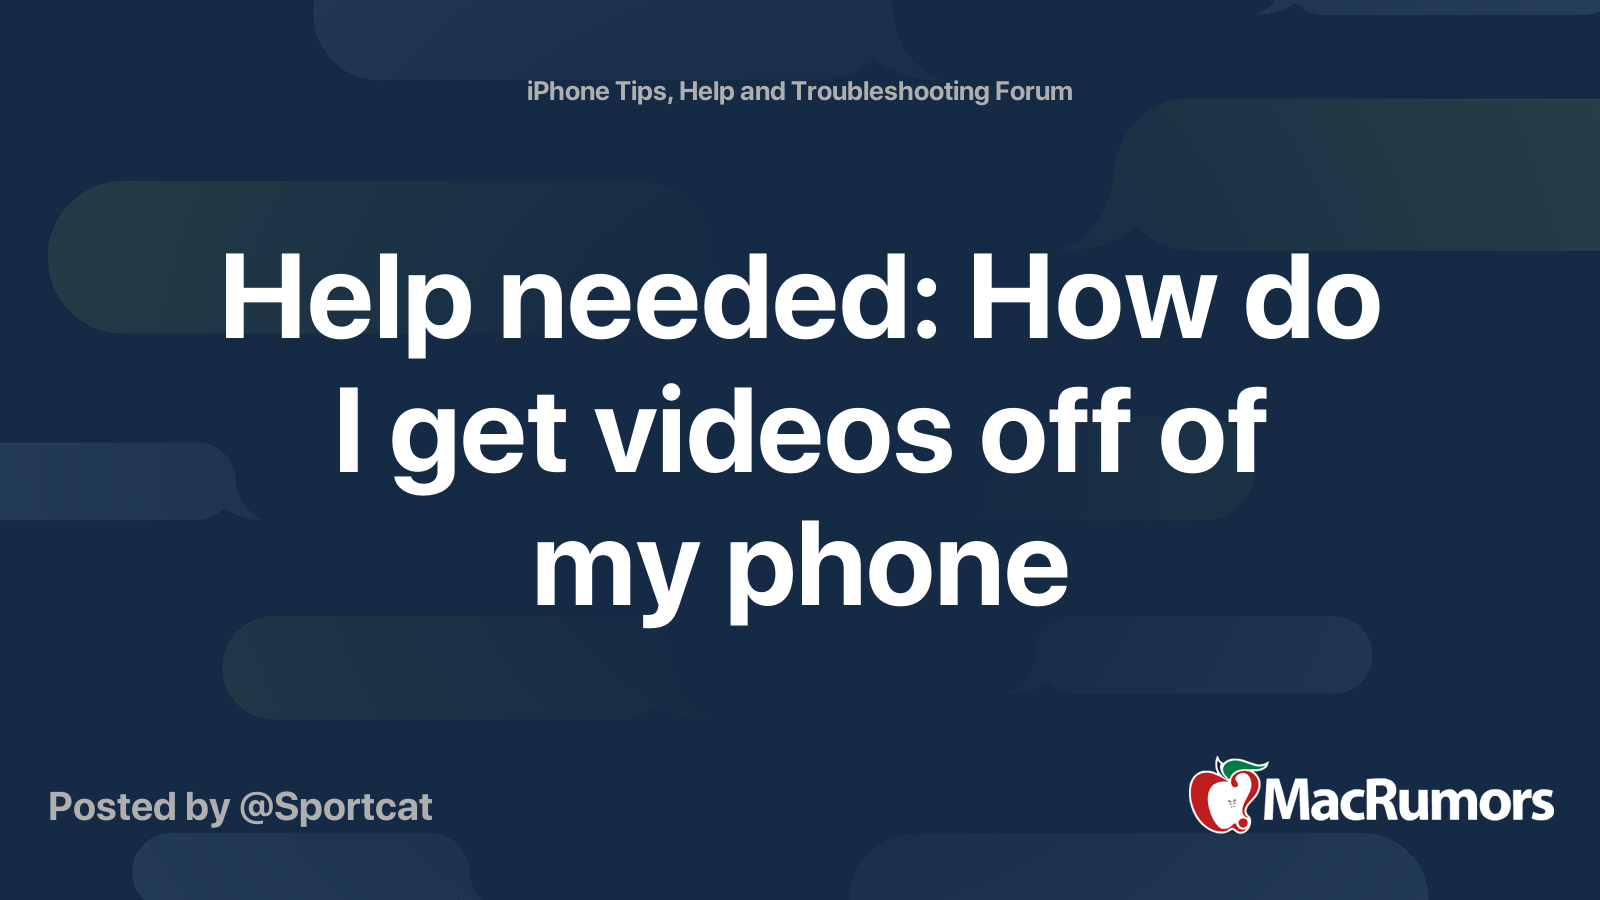 help-needed-how-do-i-get-videos-off-of-my-phone-macrumors-forums